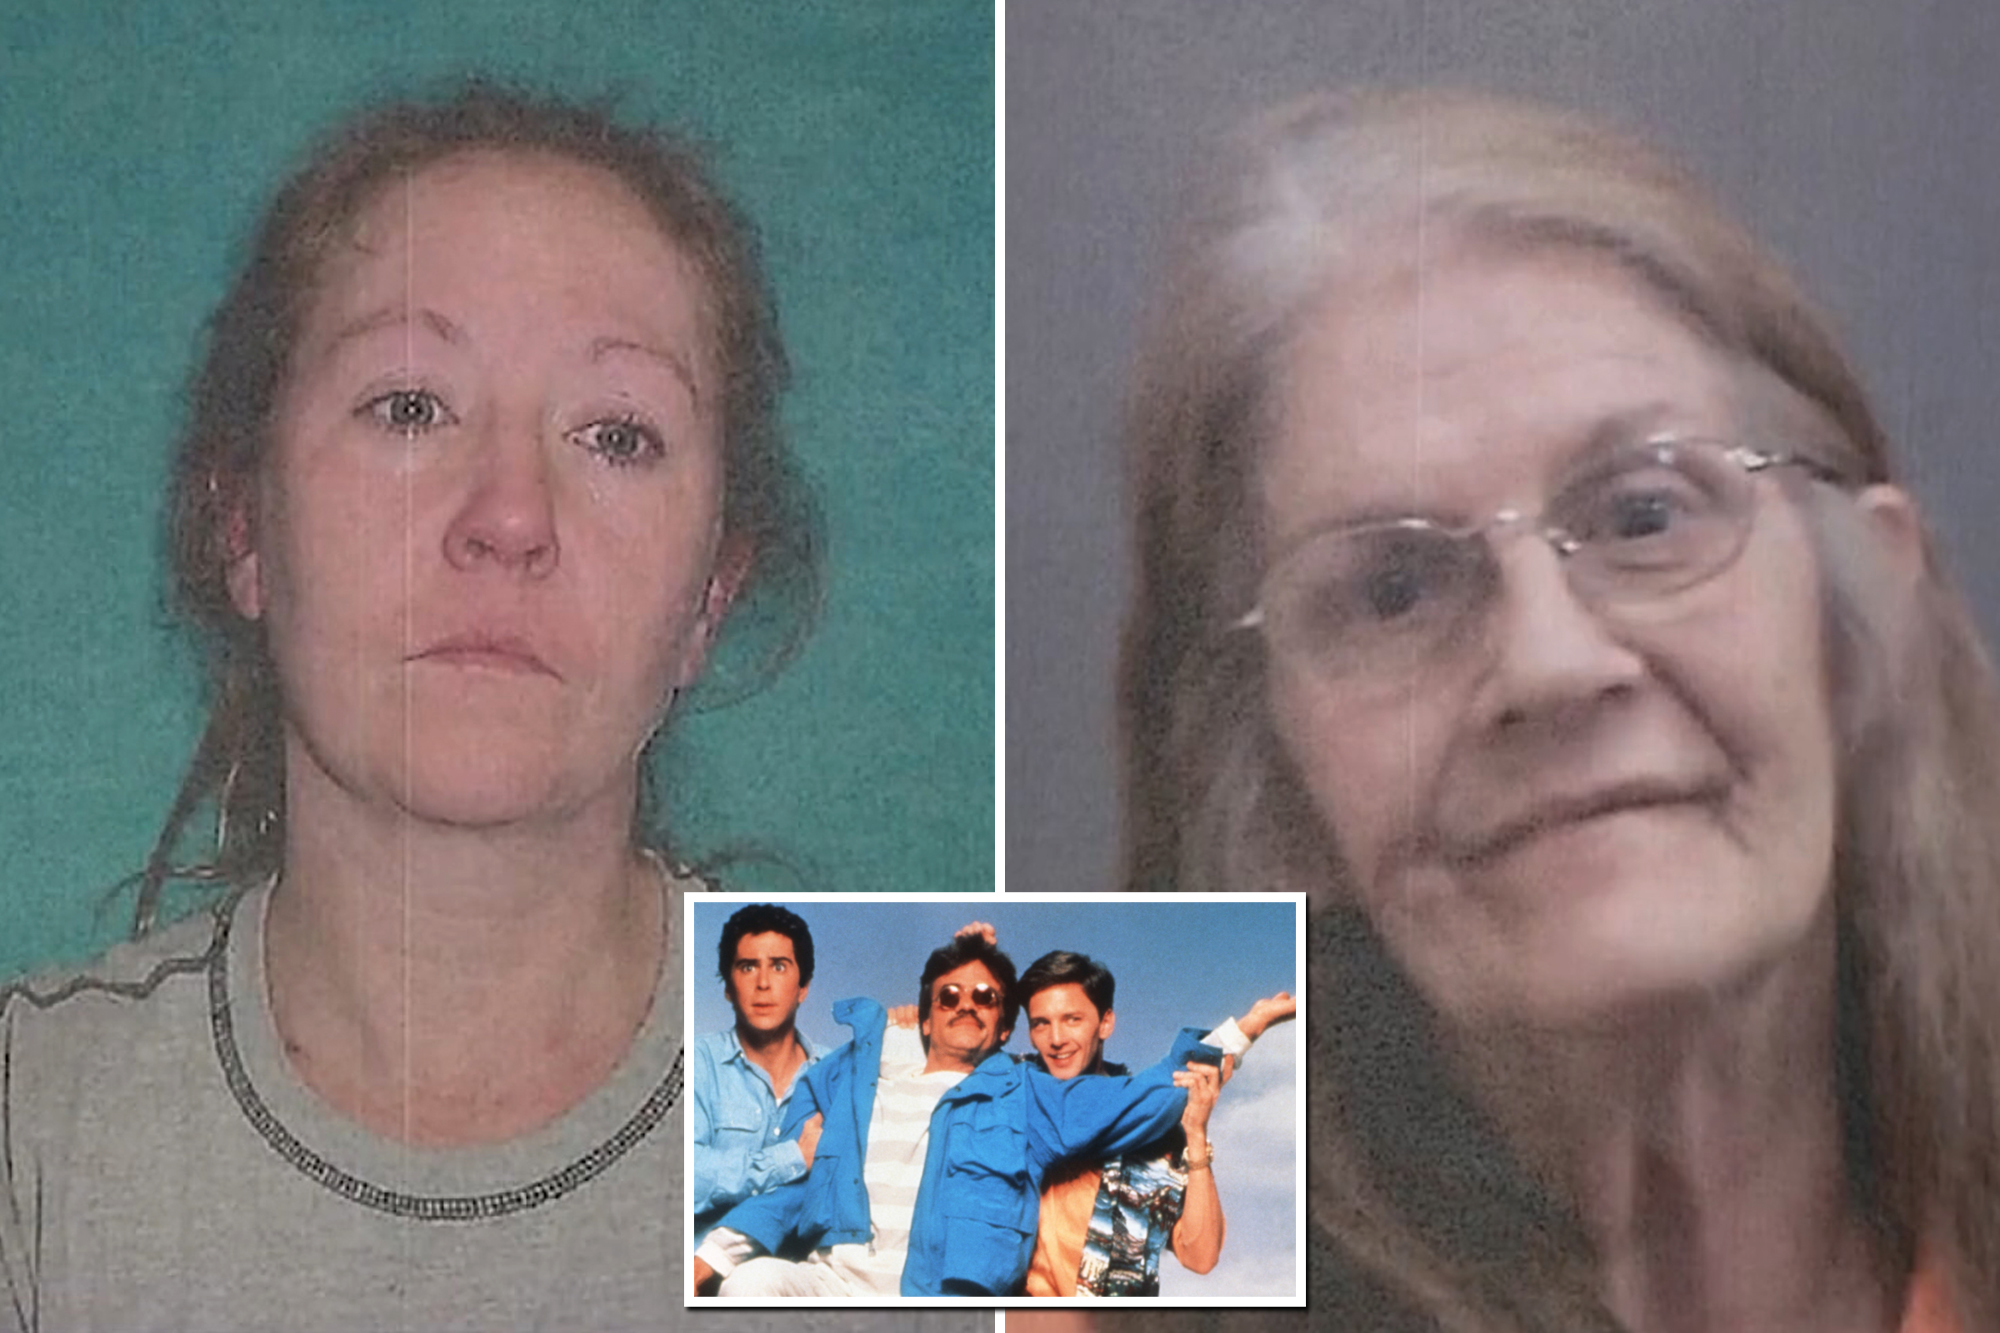 2 women allegedly drove dead man to bank in ‘Weekend at Bernie’s’-style plot to withdraw his money